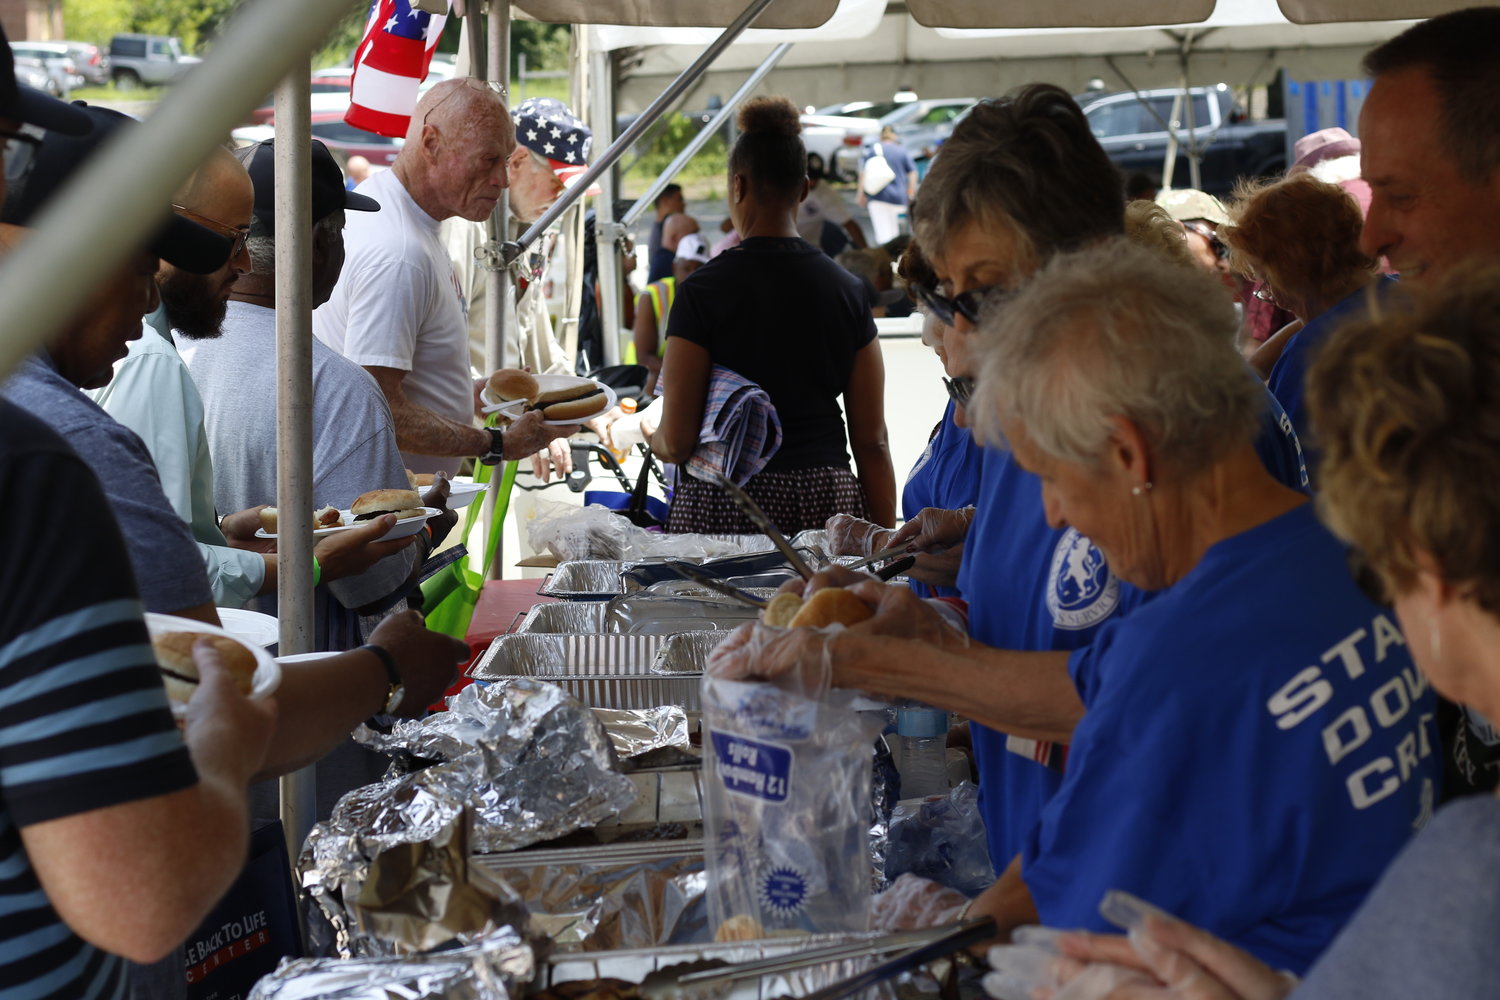 A barbecue was staffed by volunteers who called themselves the Stand Down Crew.